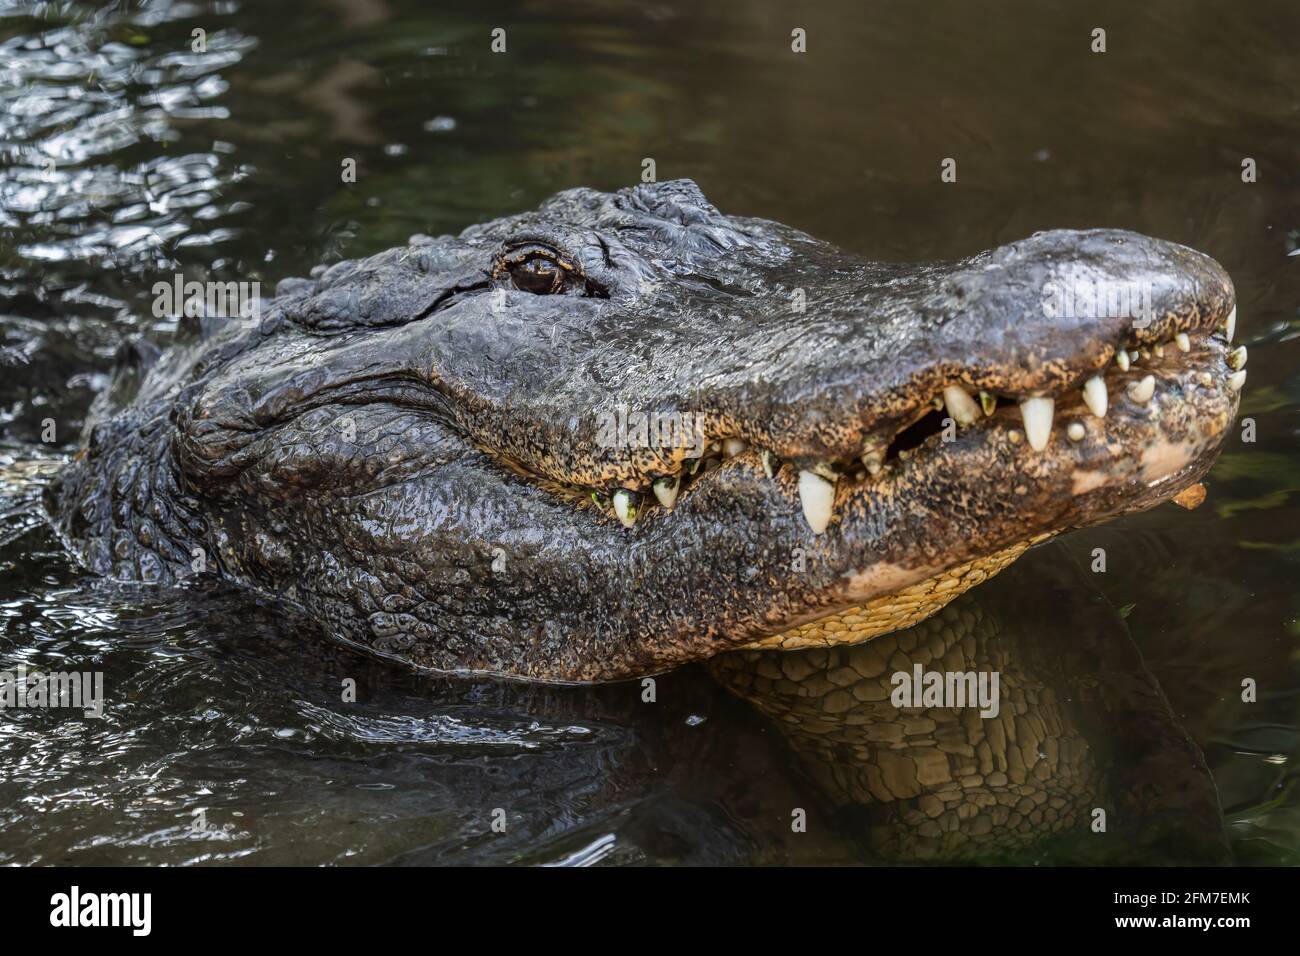 A bellowing alligator Stock Photo